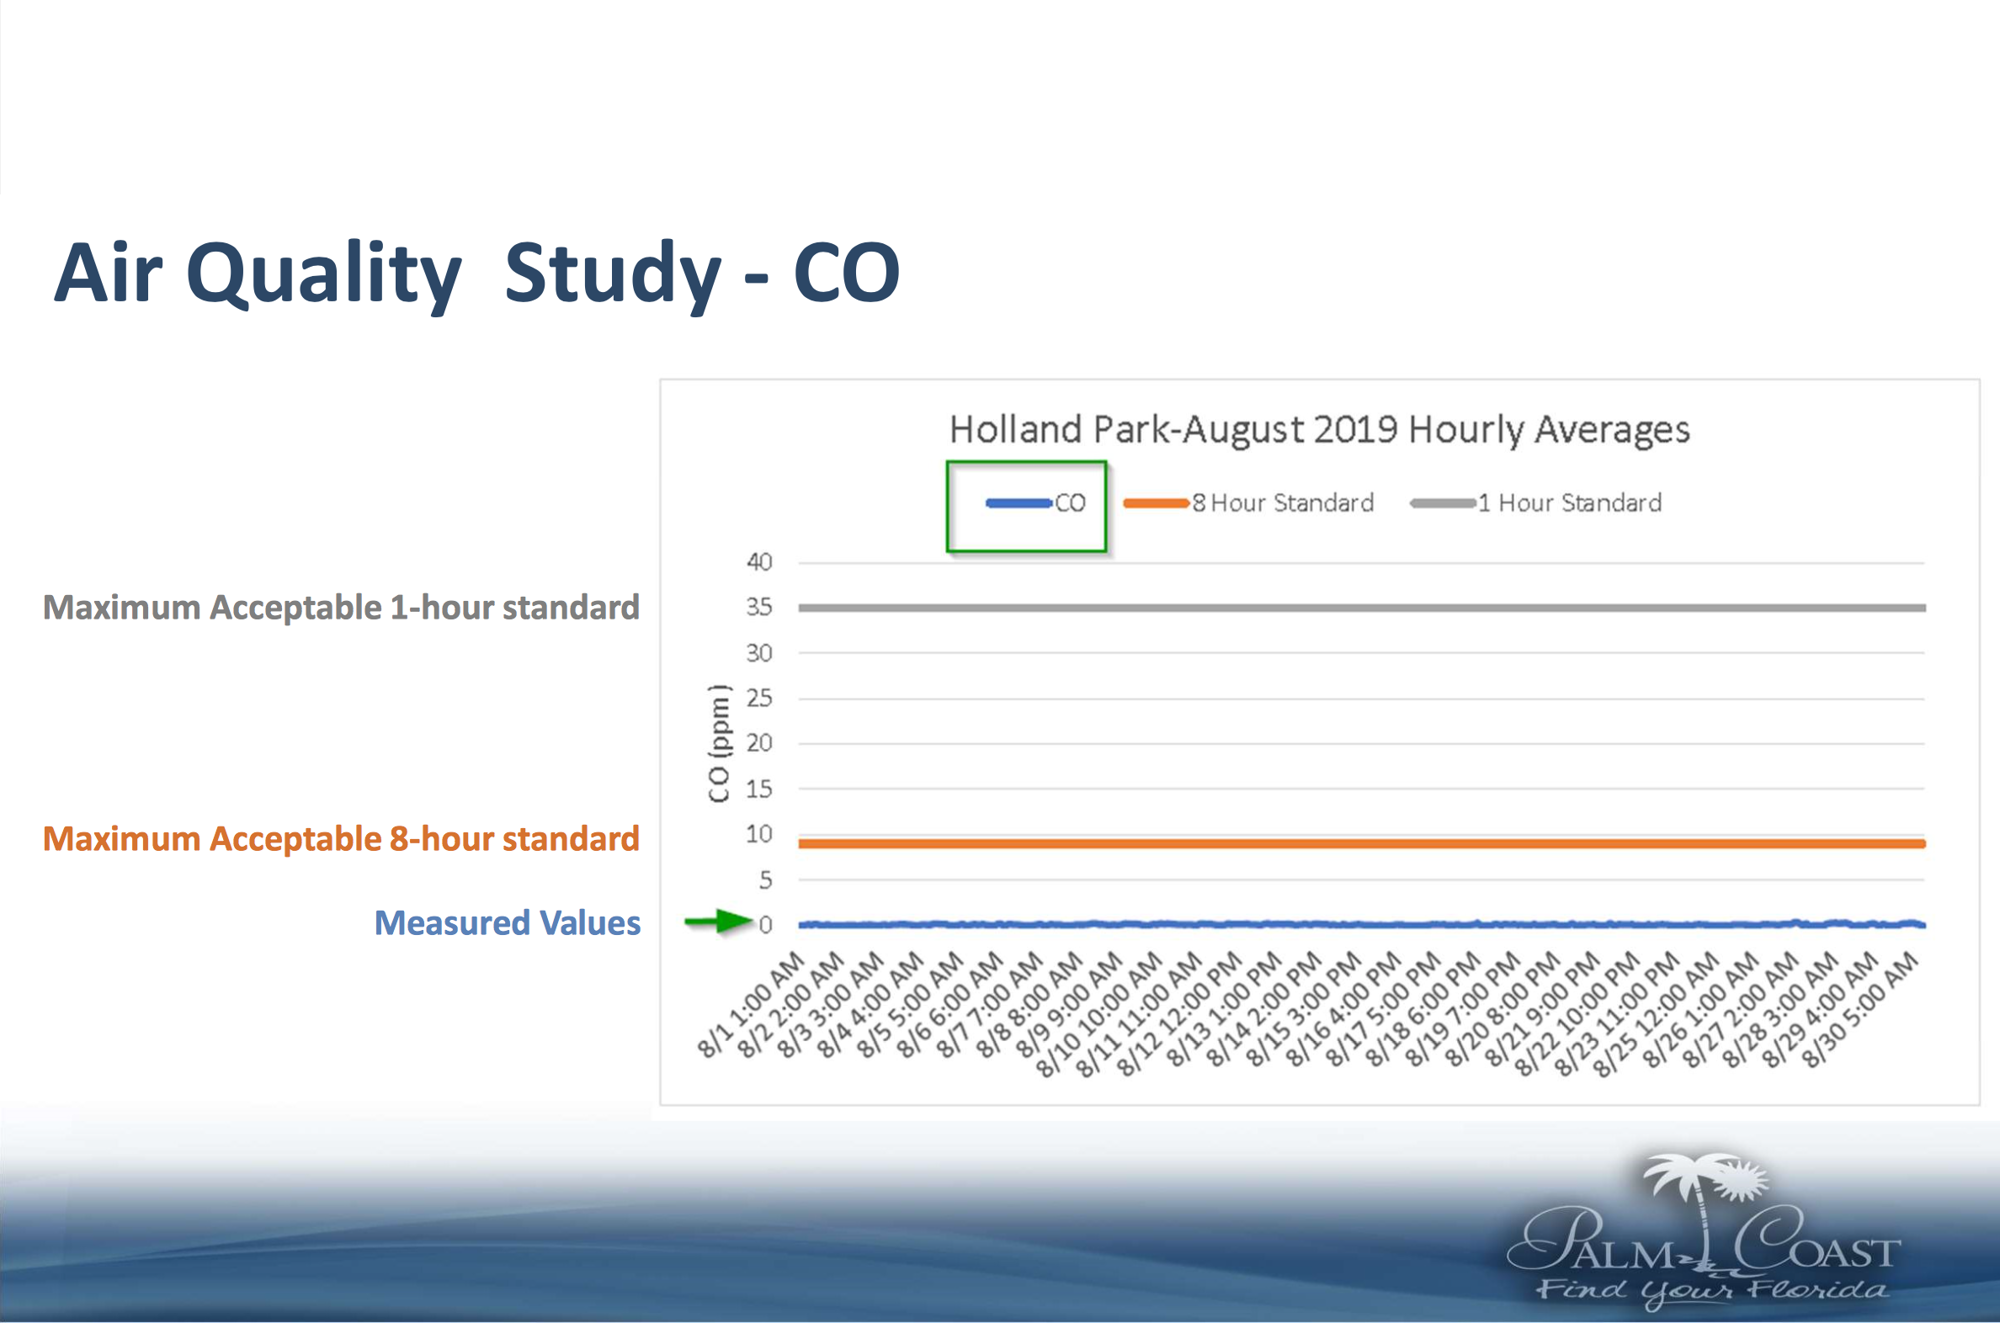 The city's air quality testing results for carbon monoxide. Image courtesy of the city of Palm Coast